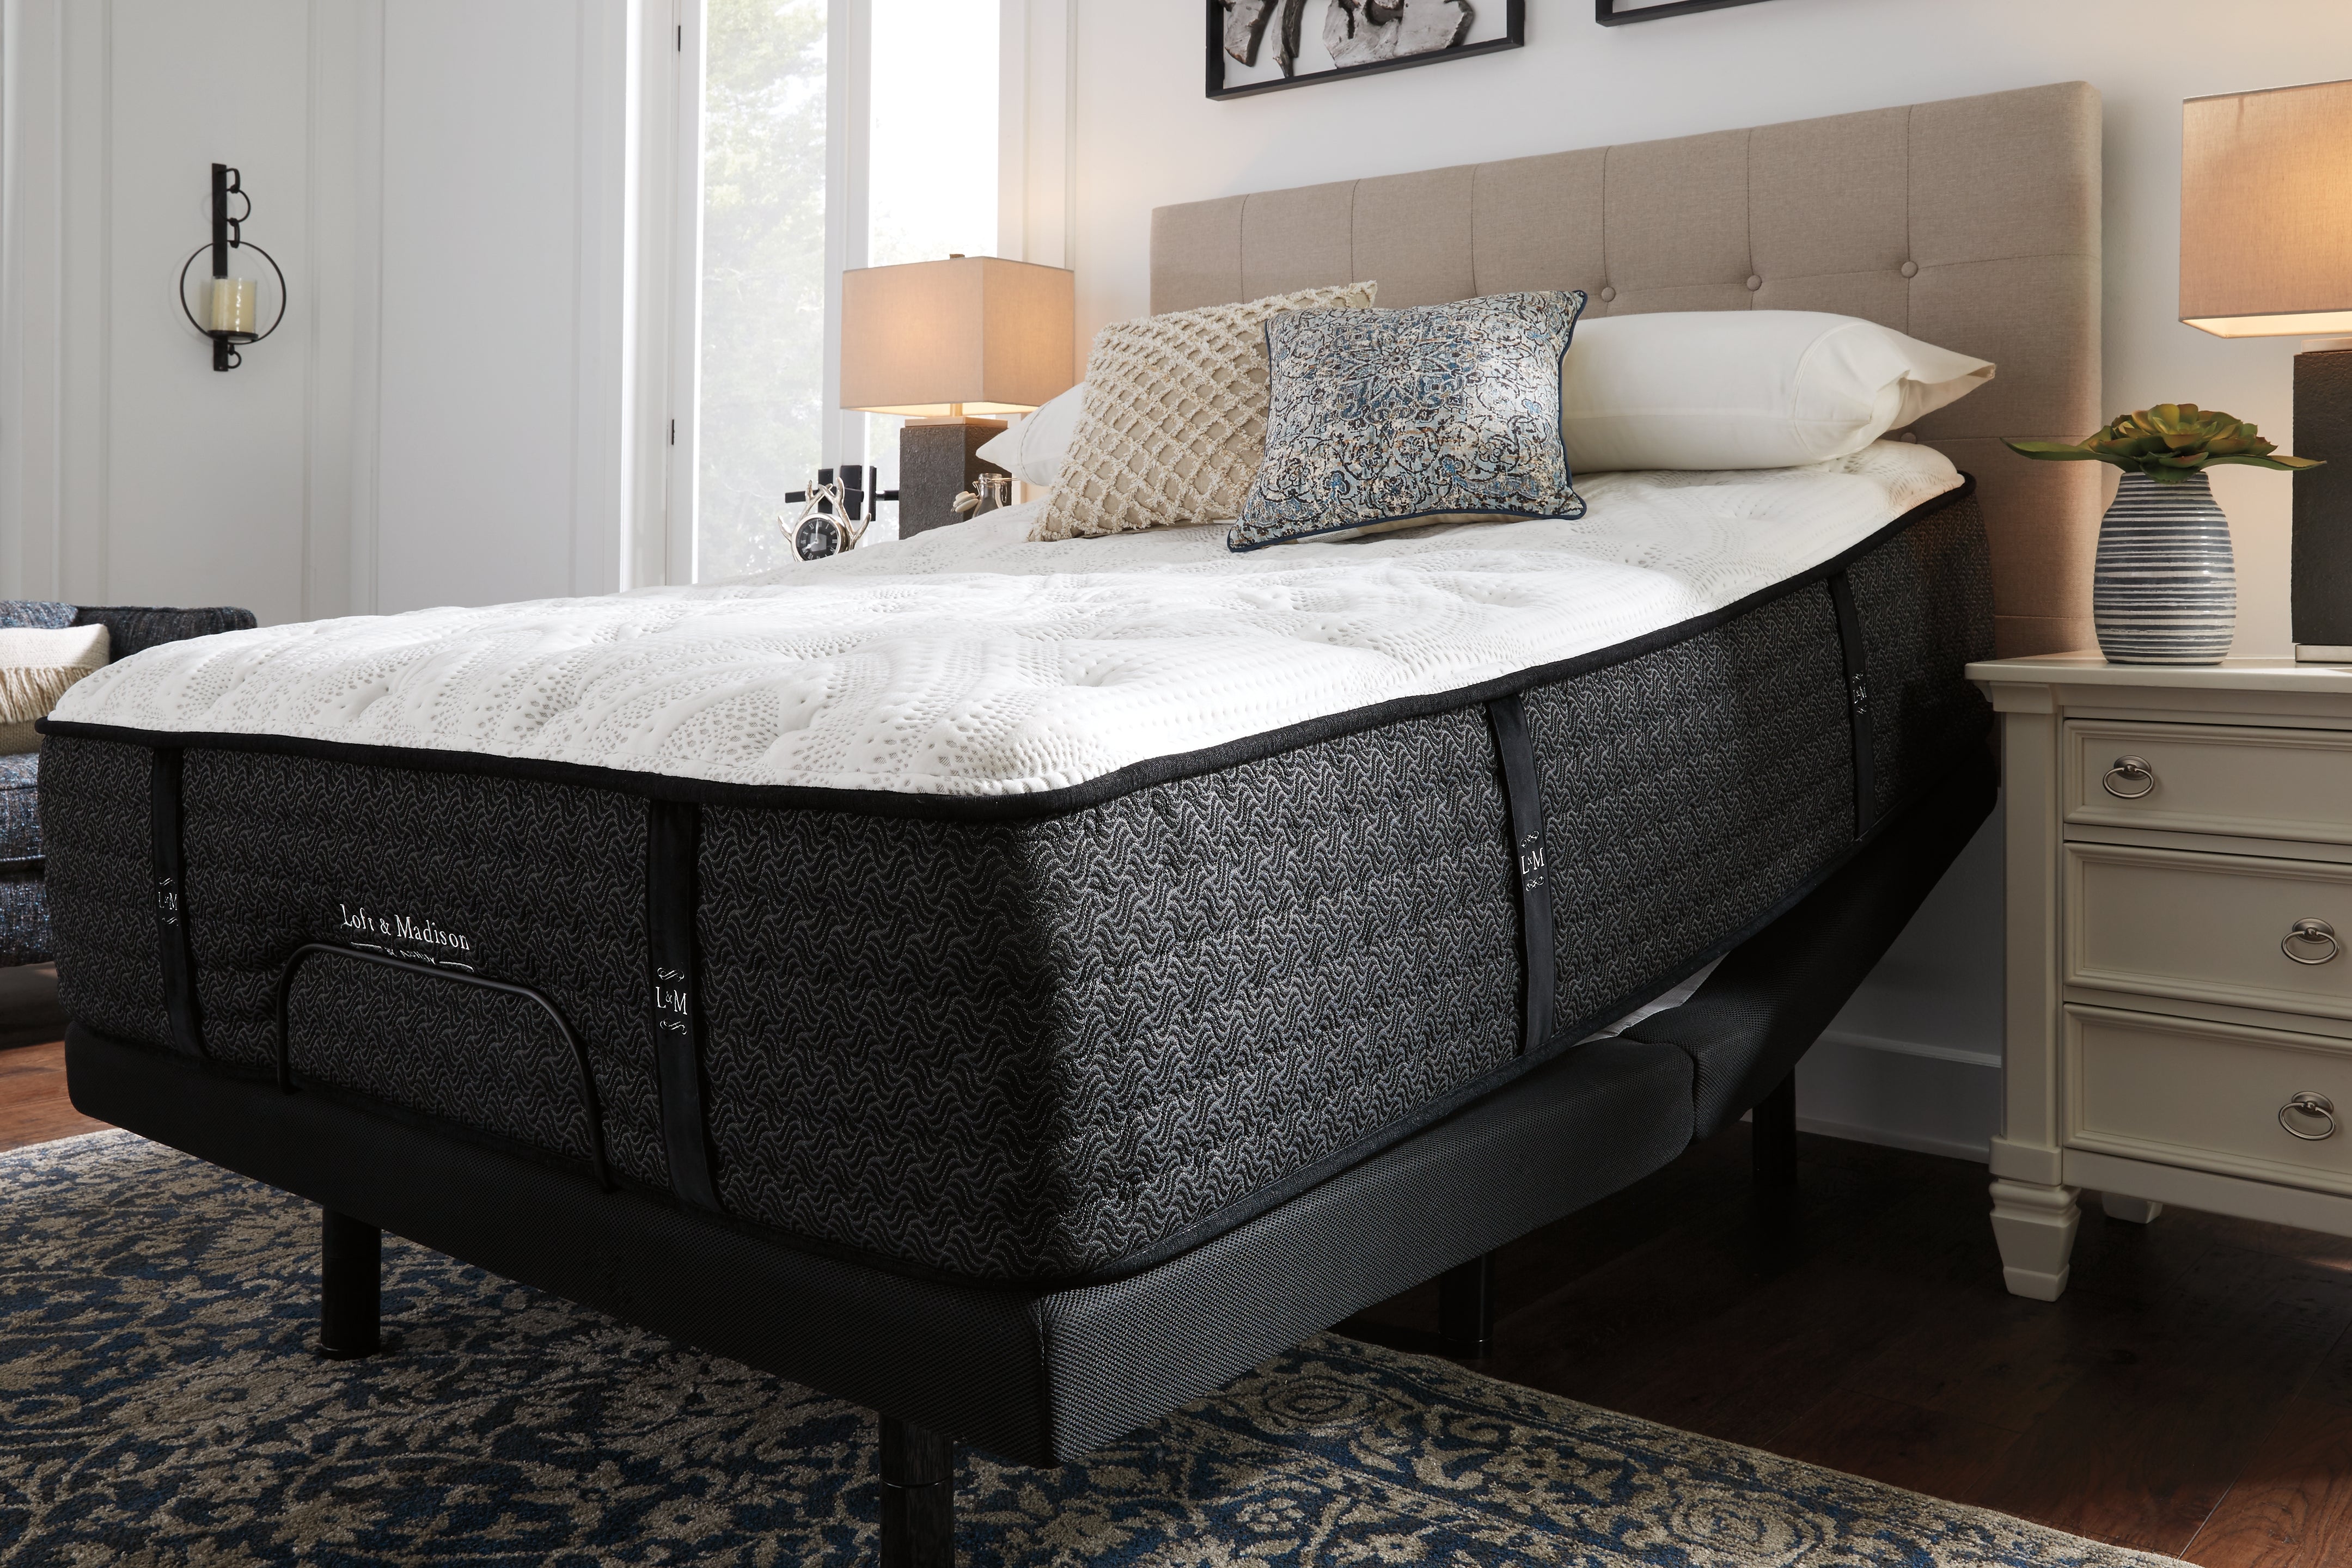 Limited Edition Firm California King Mattress with Head-Foot Model Better California King Adjustable Head Base - furniture place usa